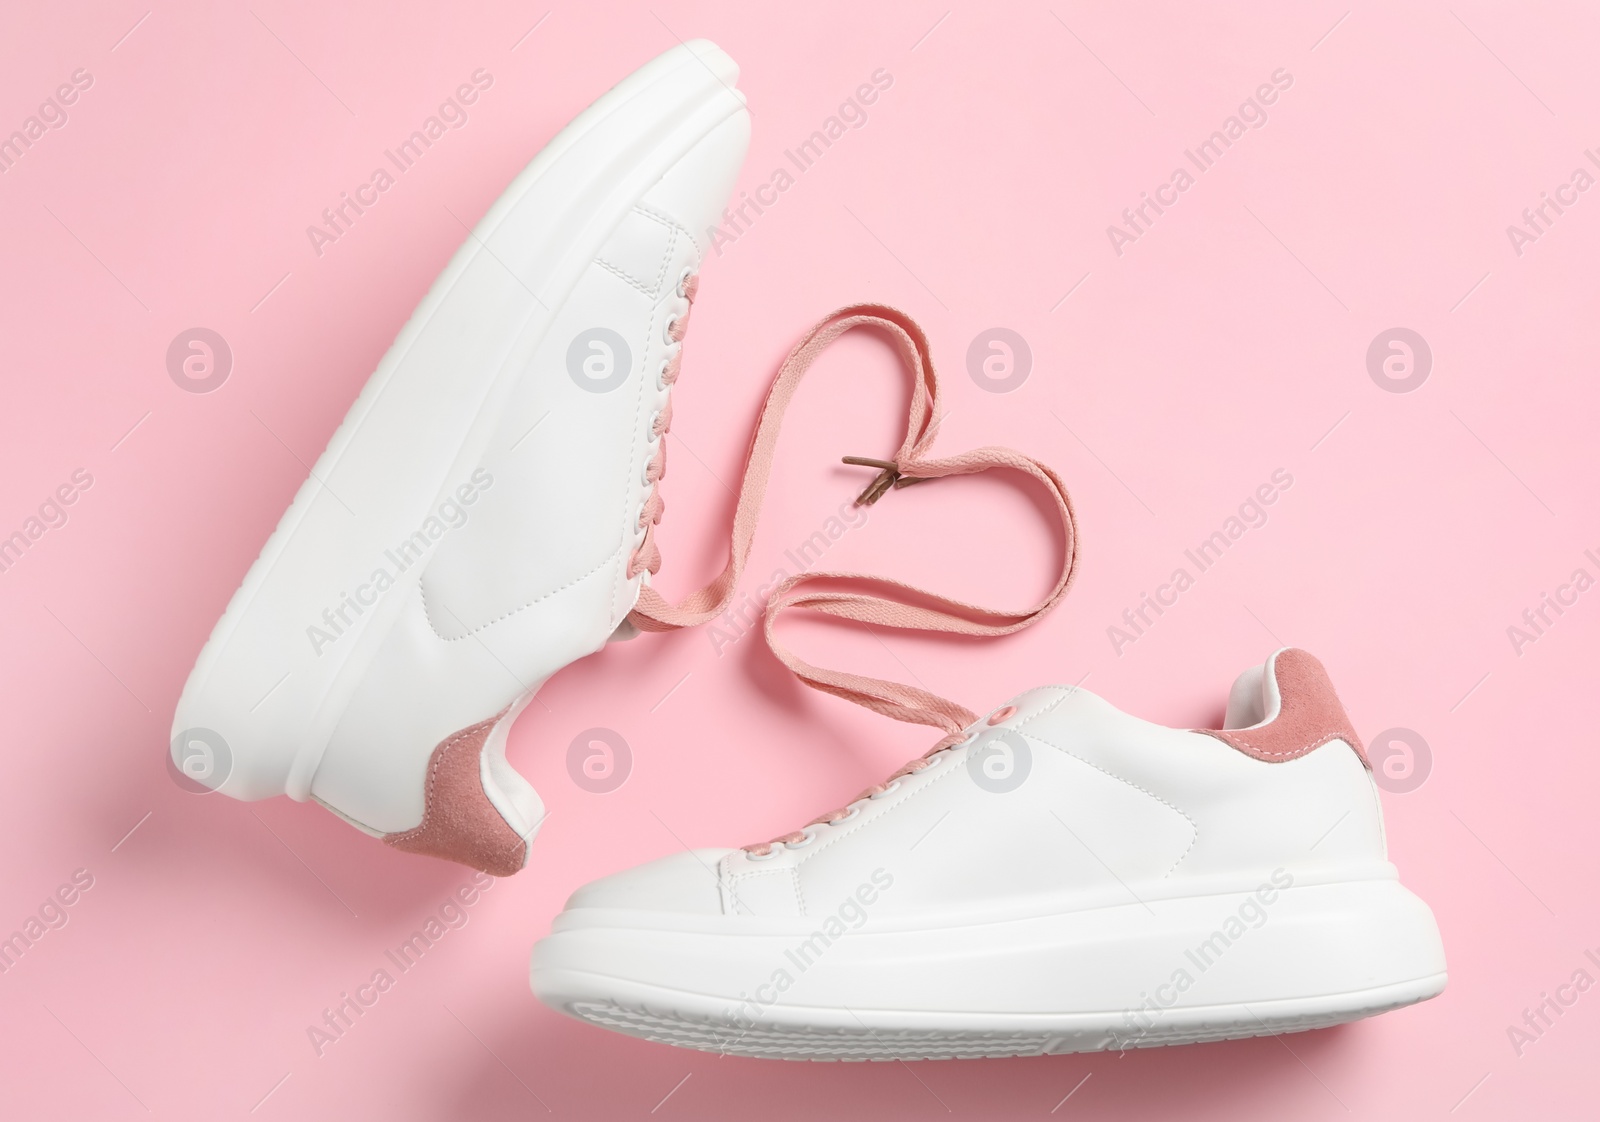 Photo of Pair of stylish shoes with laces on pink background flat lay